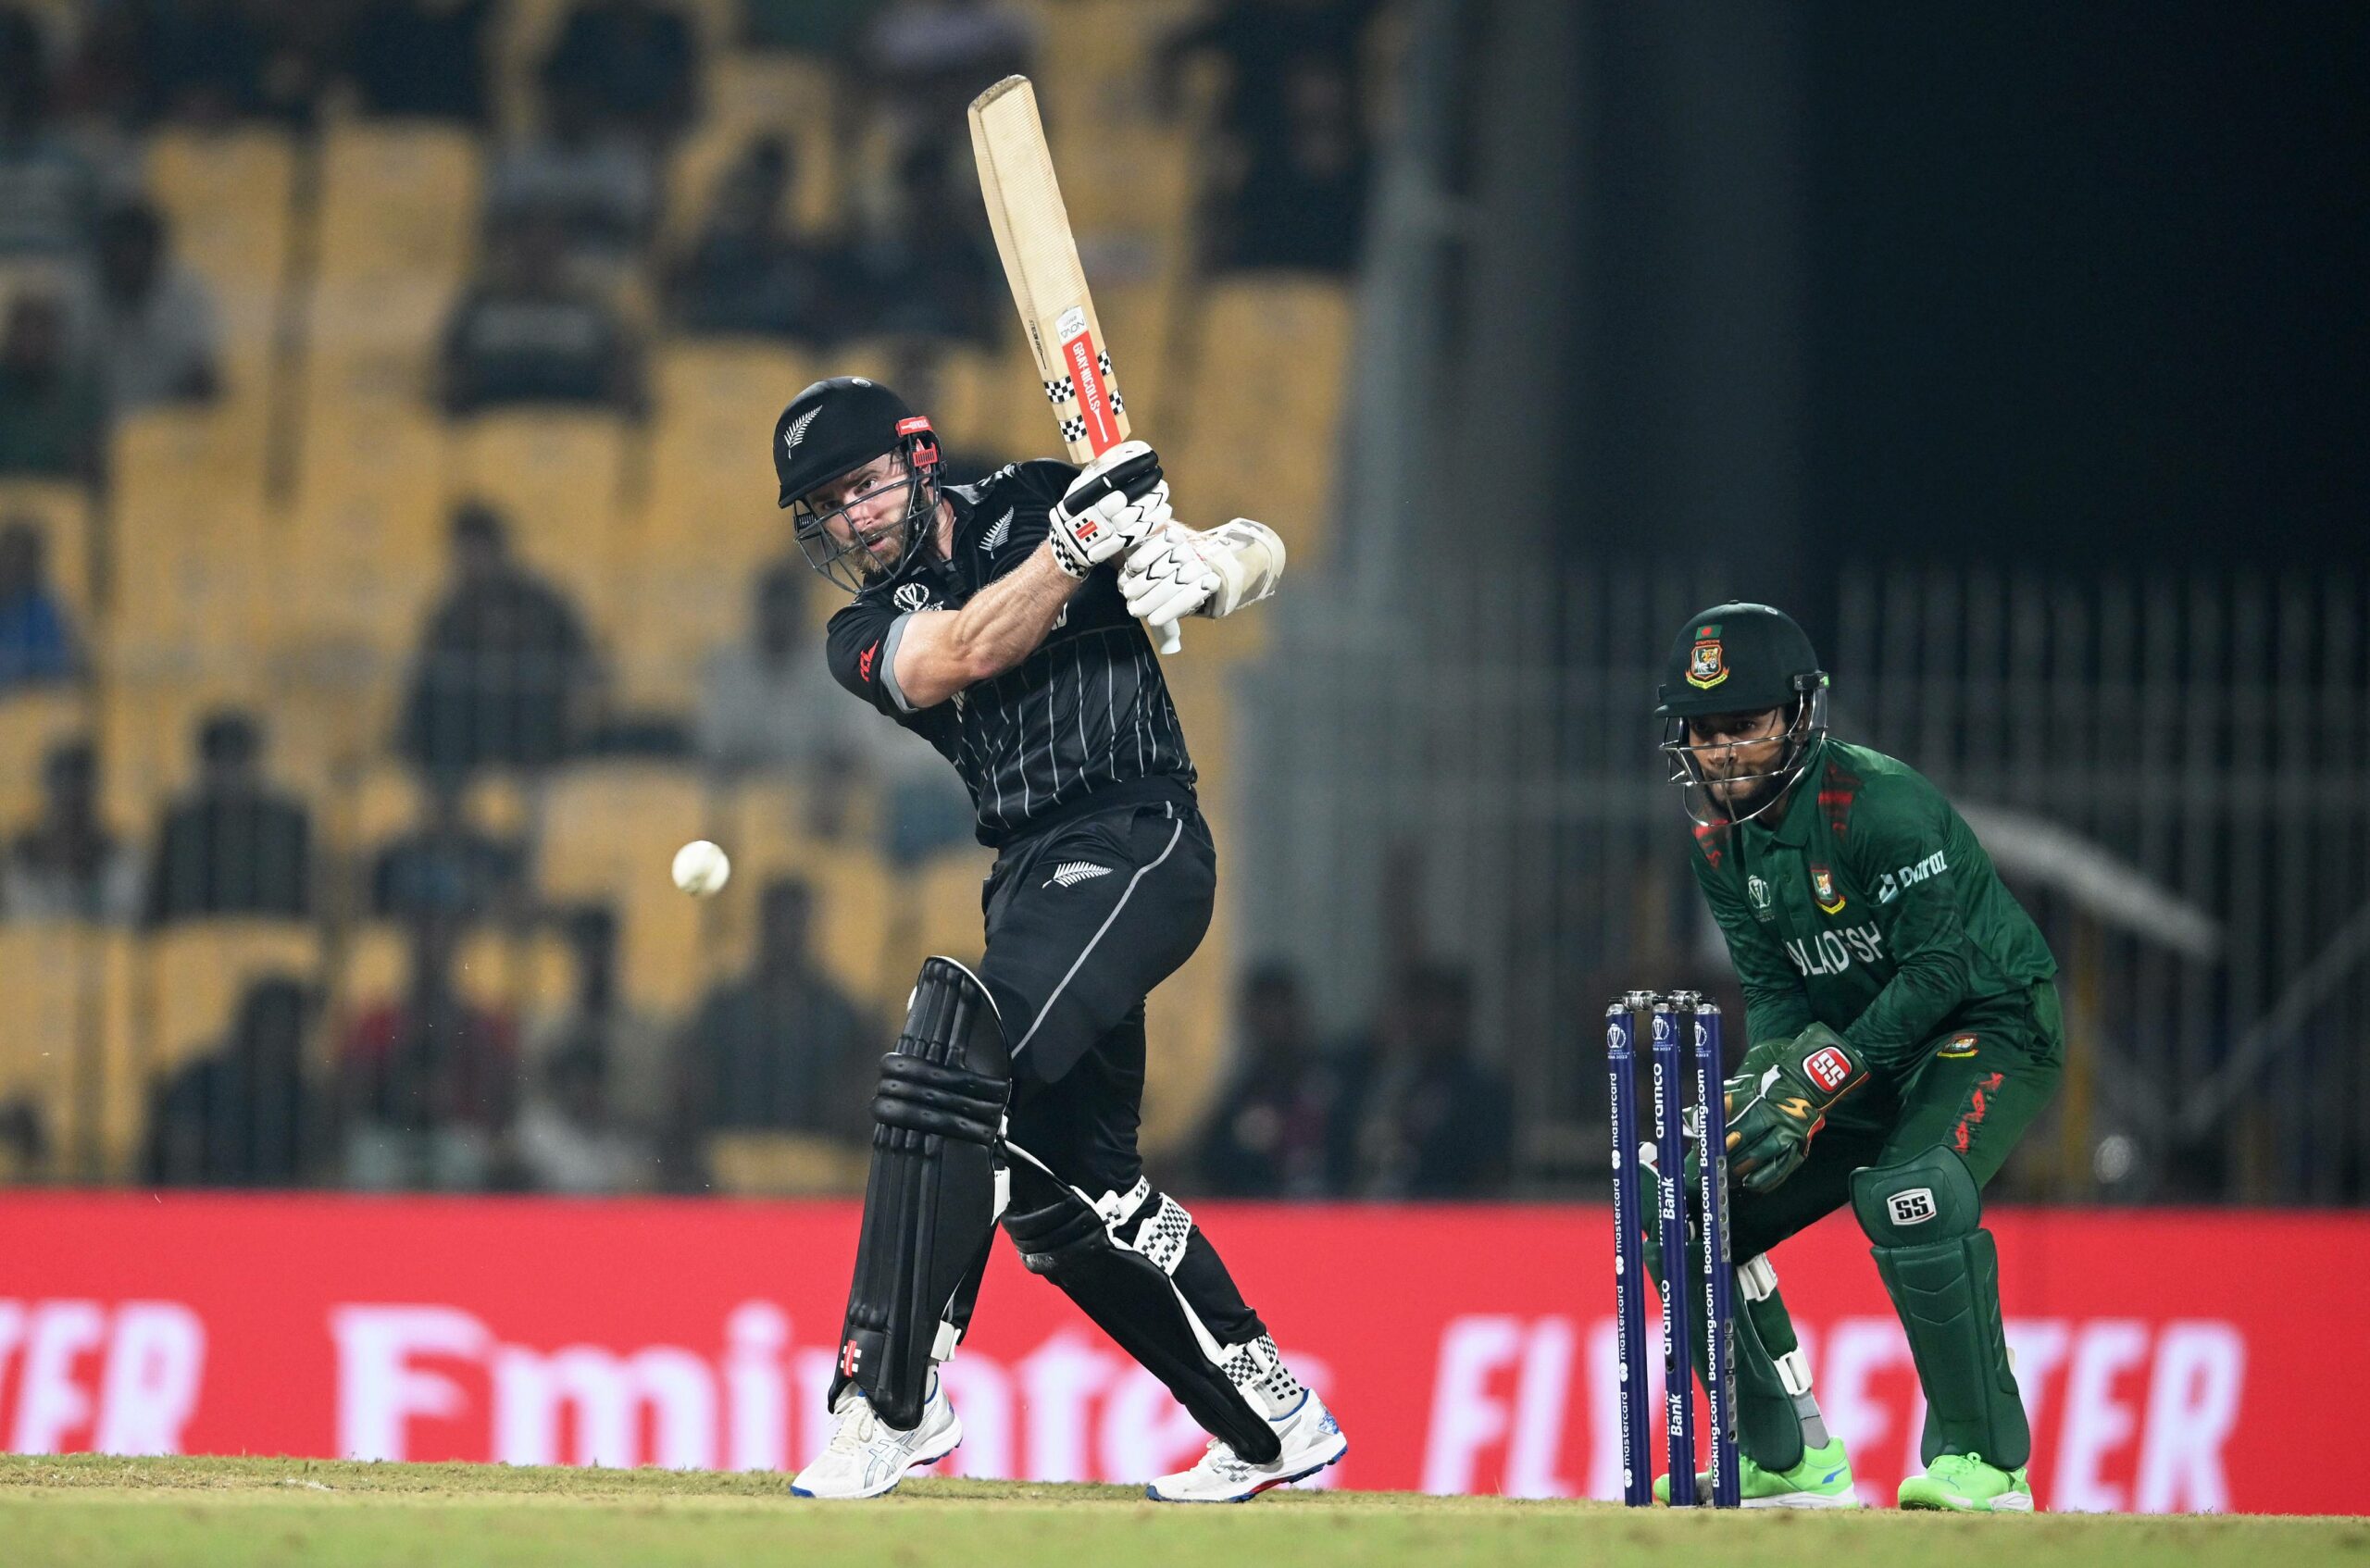 New Zealand's captain Kane Williamson during the 2023 ICC Men's Cricket World Cup one-day international (ODI) match between New Zealand and Bangladesh at the MA Chidambaram Stadium in Chennai on October 13, 2023. (Photo by R.Satish BABU / AFP) / -- IMAGE RESTRICTED TO EDITORIAL USE - STRICTLY NO COMMERCIAL USE -- (Photo by R.SATISH BABU/AFP via Getty Images)